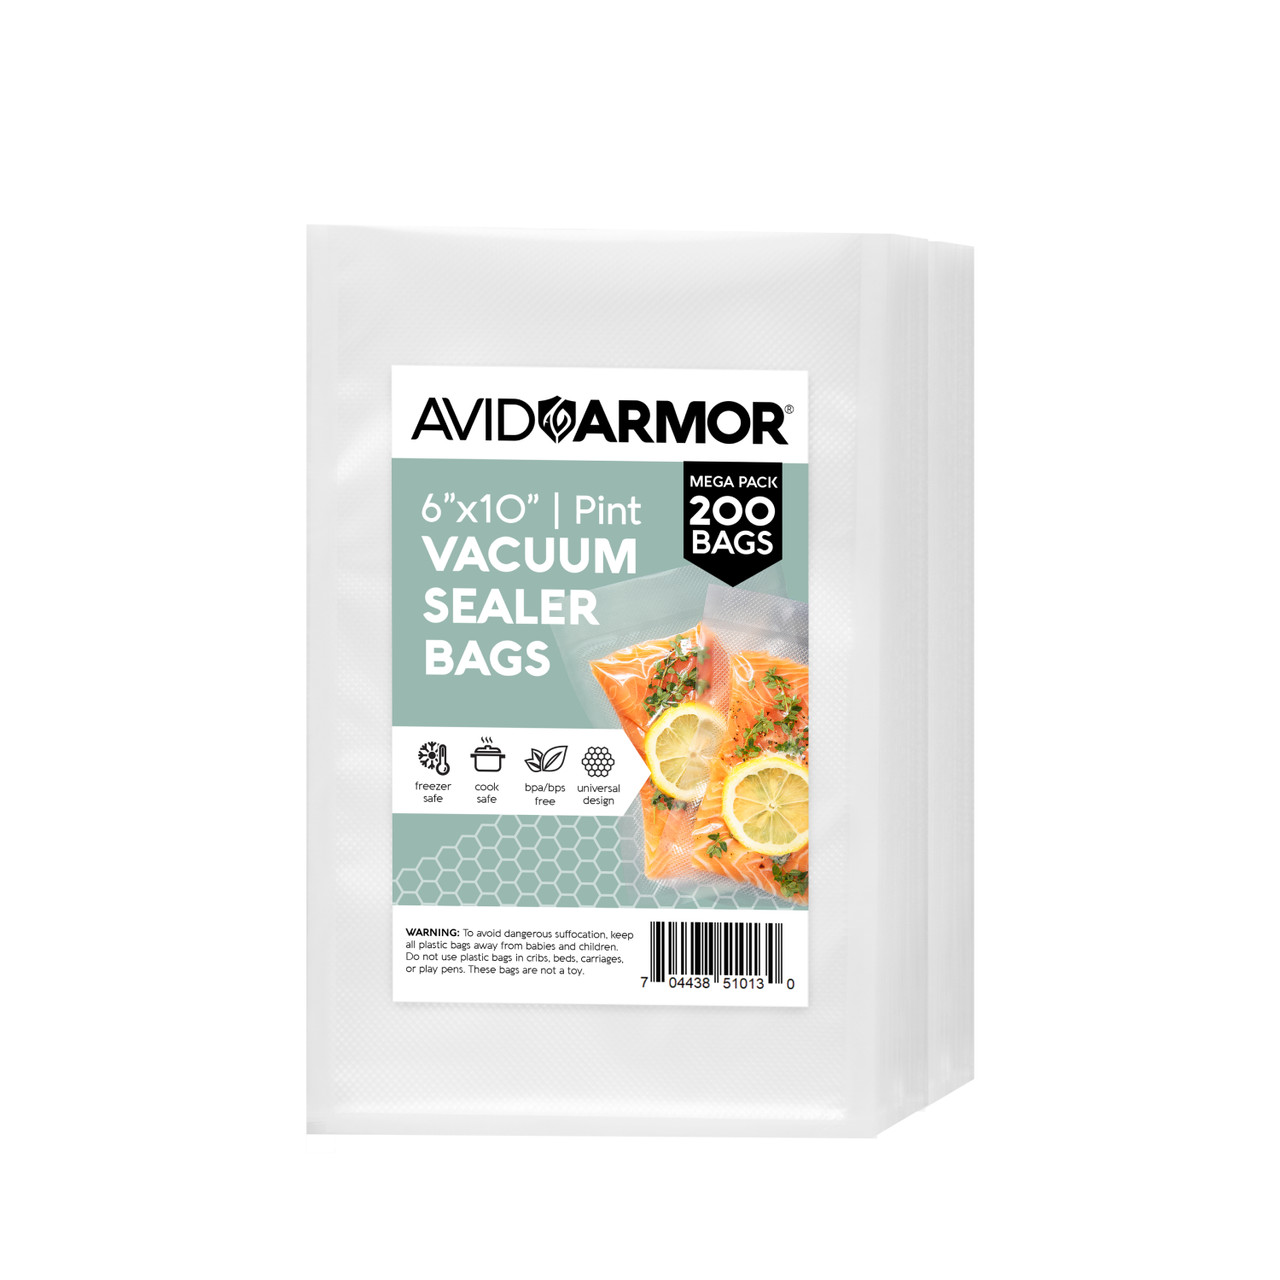  Happy Seal Vacuum Sealer Bags 11x50 Rolls 2 Pack for Food Saver,  Seal a Meal, BPA Free, Commercial Grade, Great for Vac Storage, Meal Prep  or Sous Vide: Home & Kitchen